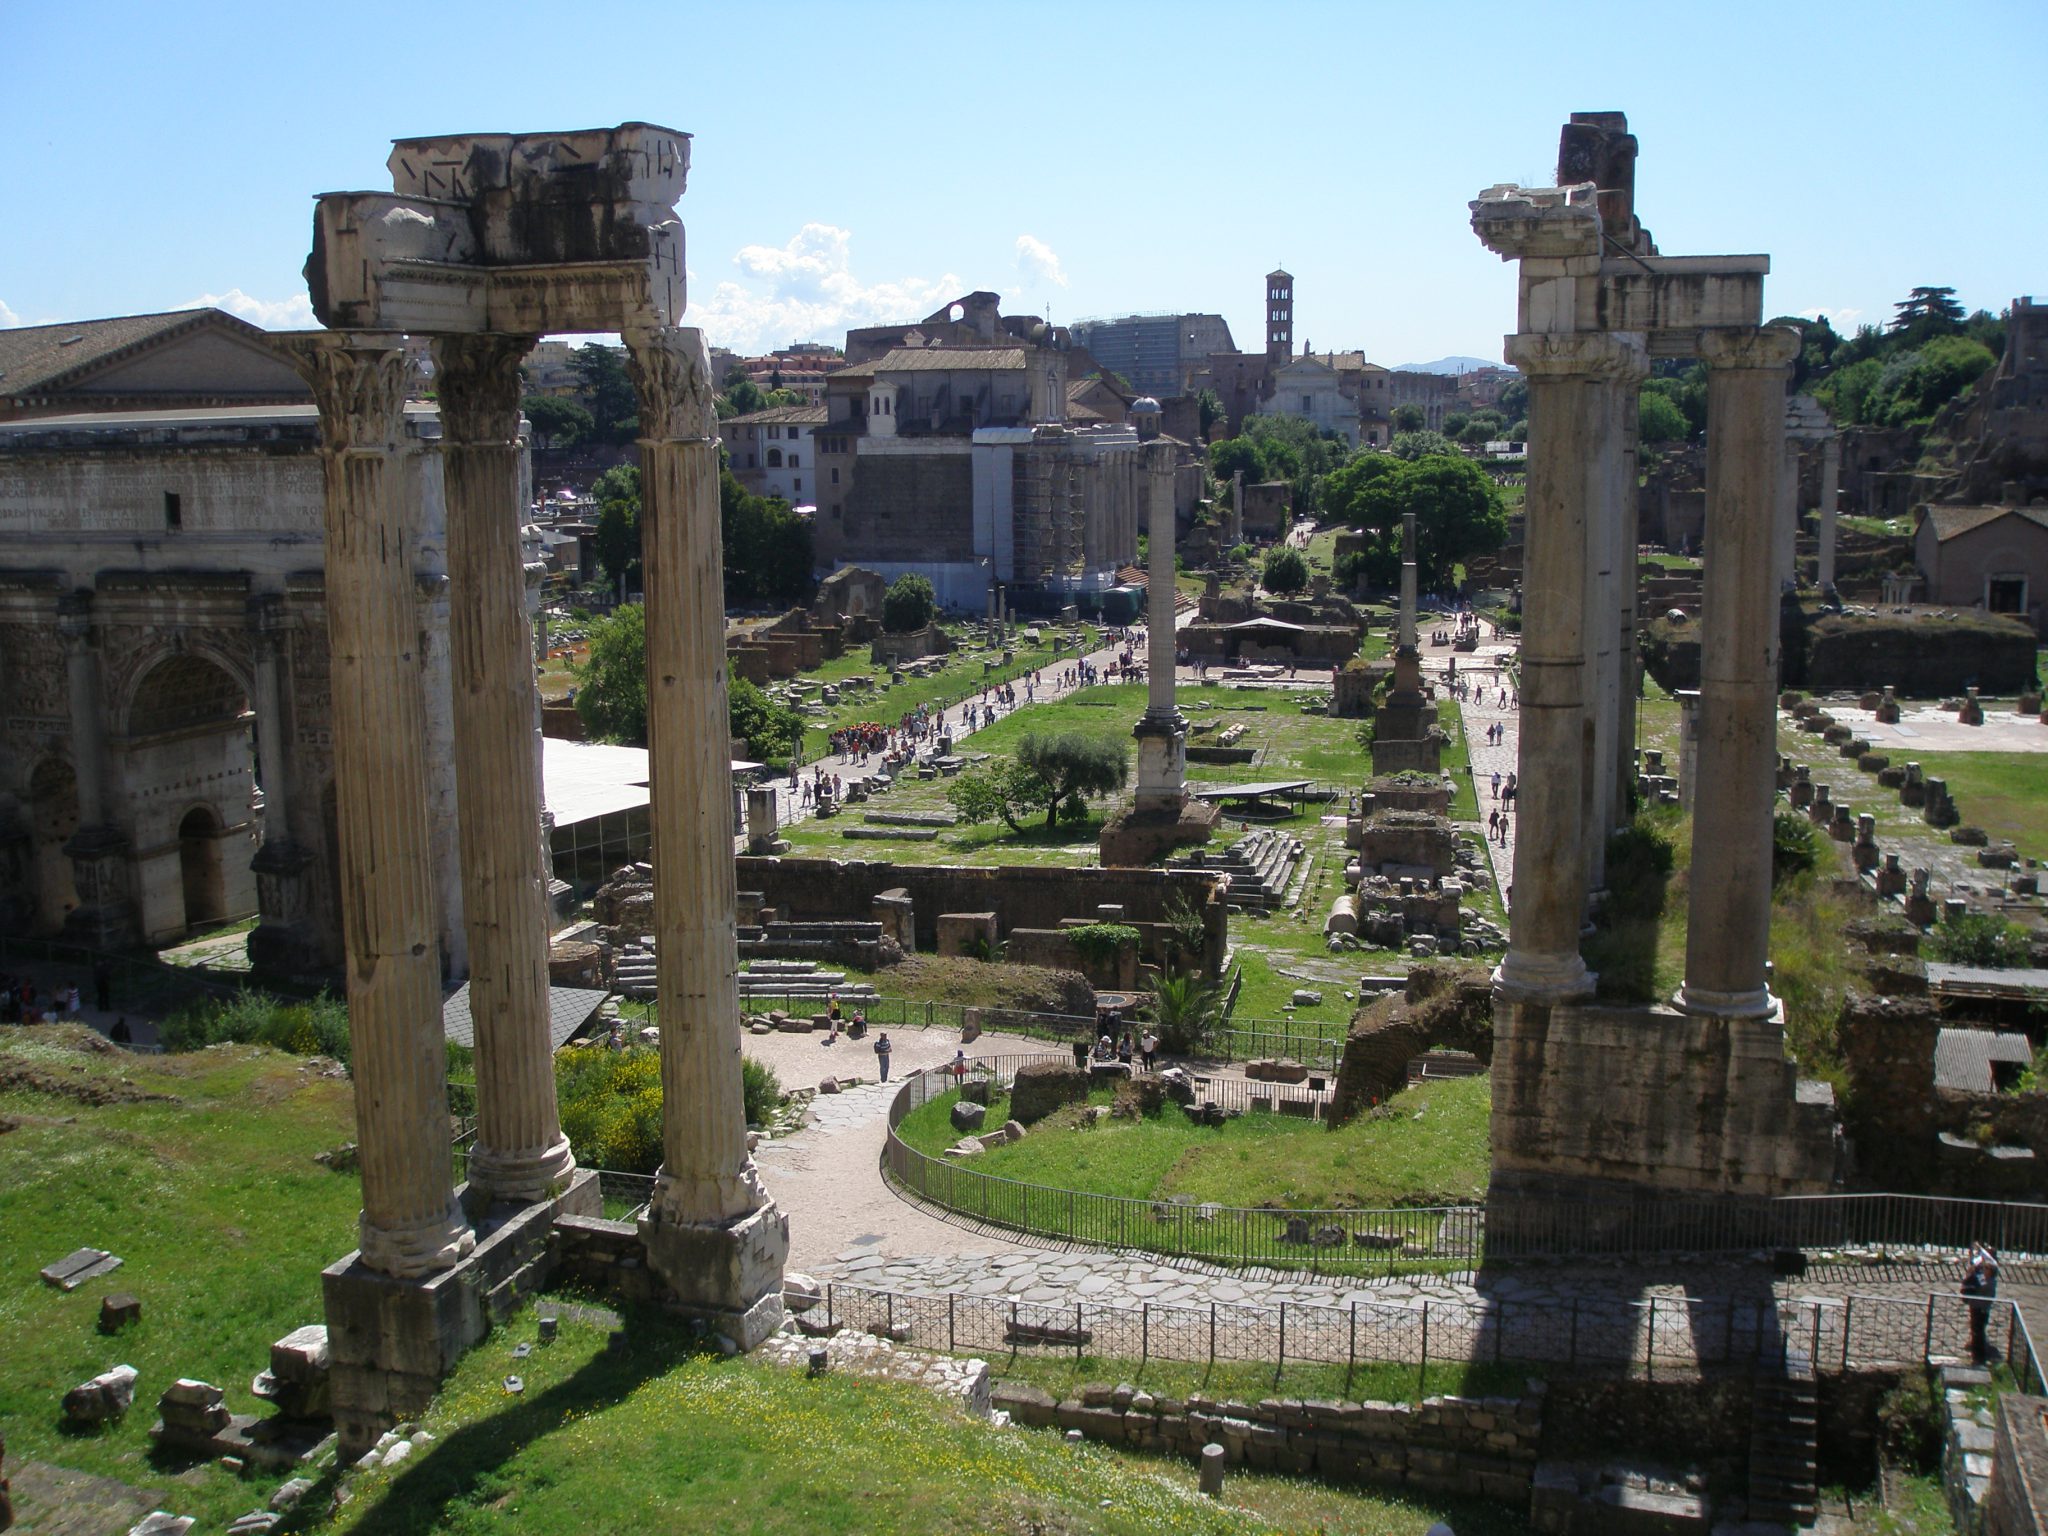 Another view from the Tabularium. Set back, in the center of the grassy rectangle are the Colonna di Foca (added in 609AD), & the Rostrum, which was a Speaker's Platform. The large green expanse marks the Square of the Roman Forum. To the left of the Forum, the long walkway is the Via Sacra. In the left foreground: 3 columns mark the corner of the Temple of Concord. In the right foreground, the tall columns and pediment are the front of the Temple of Saturn.